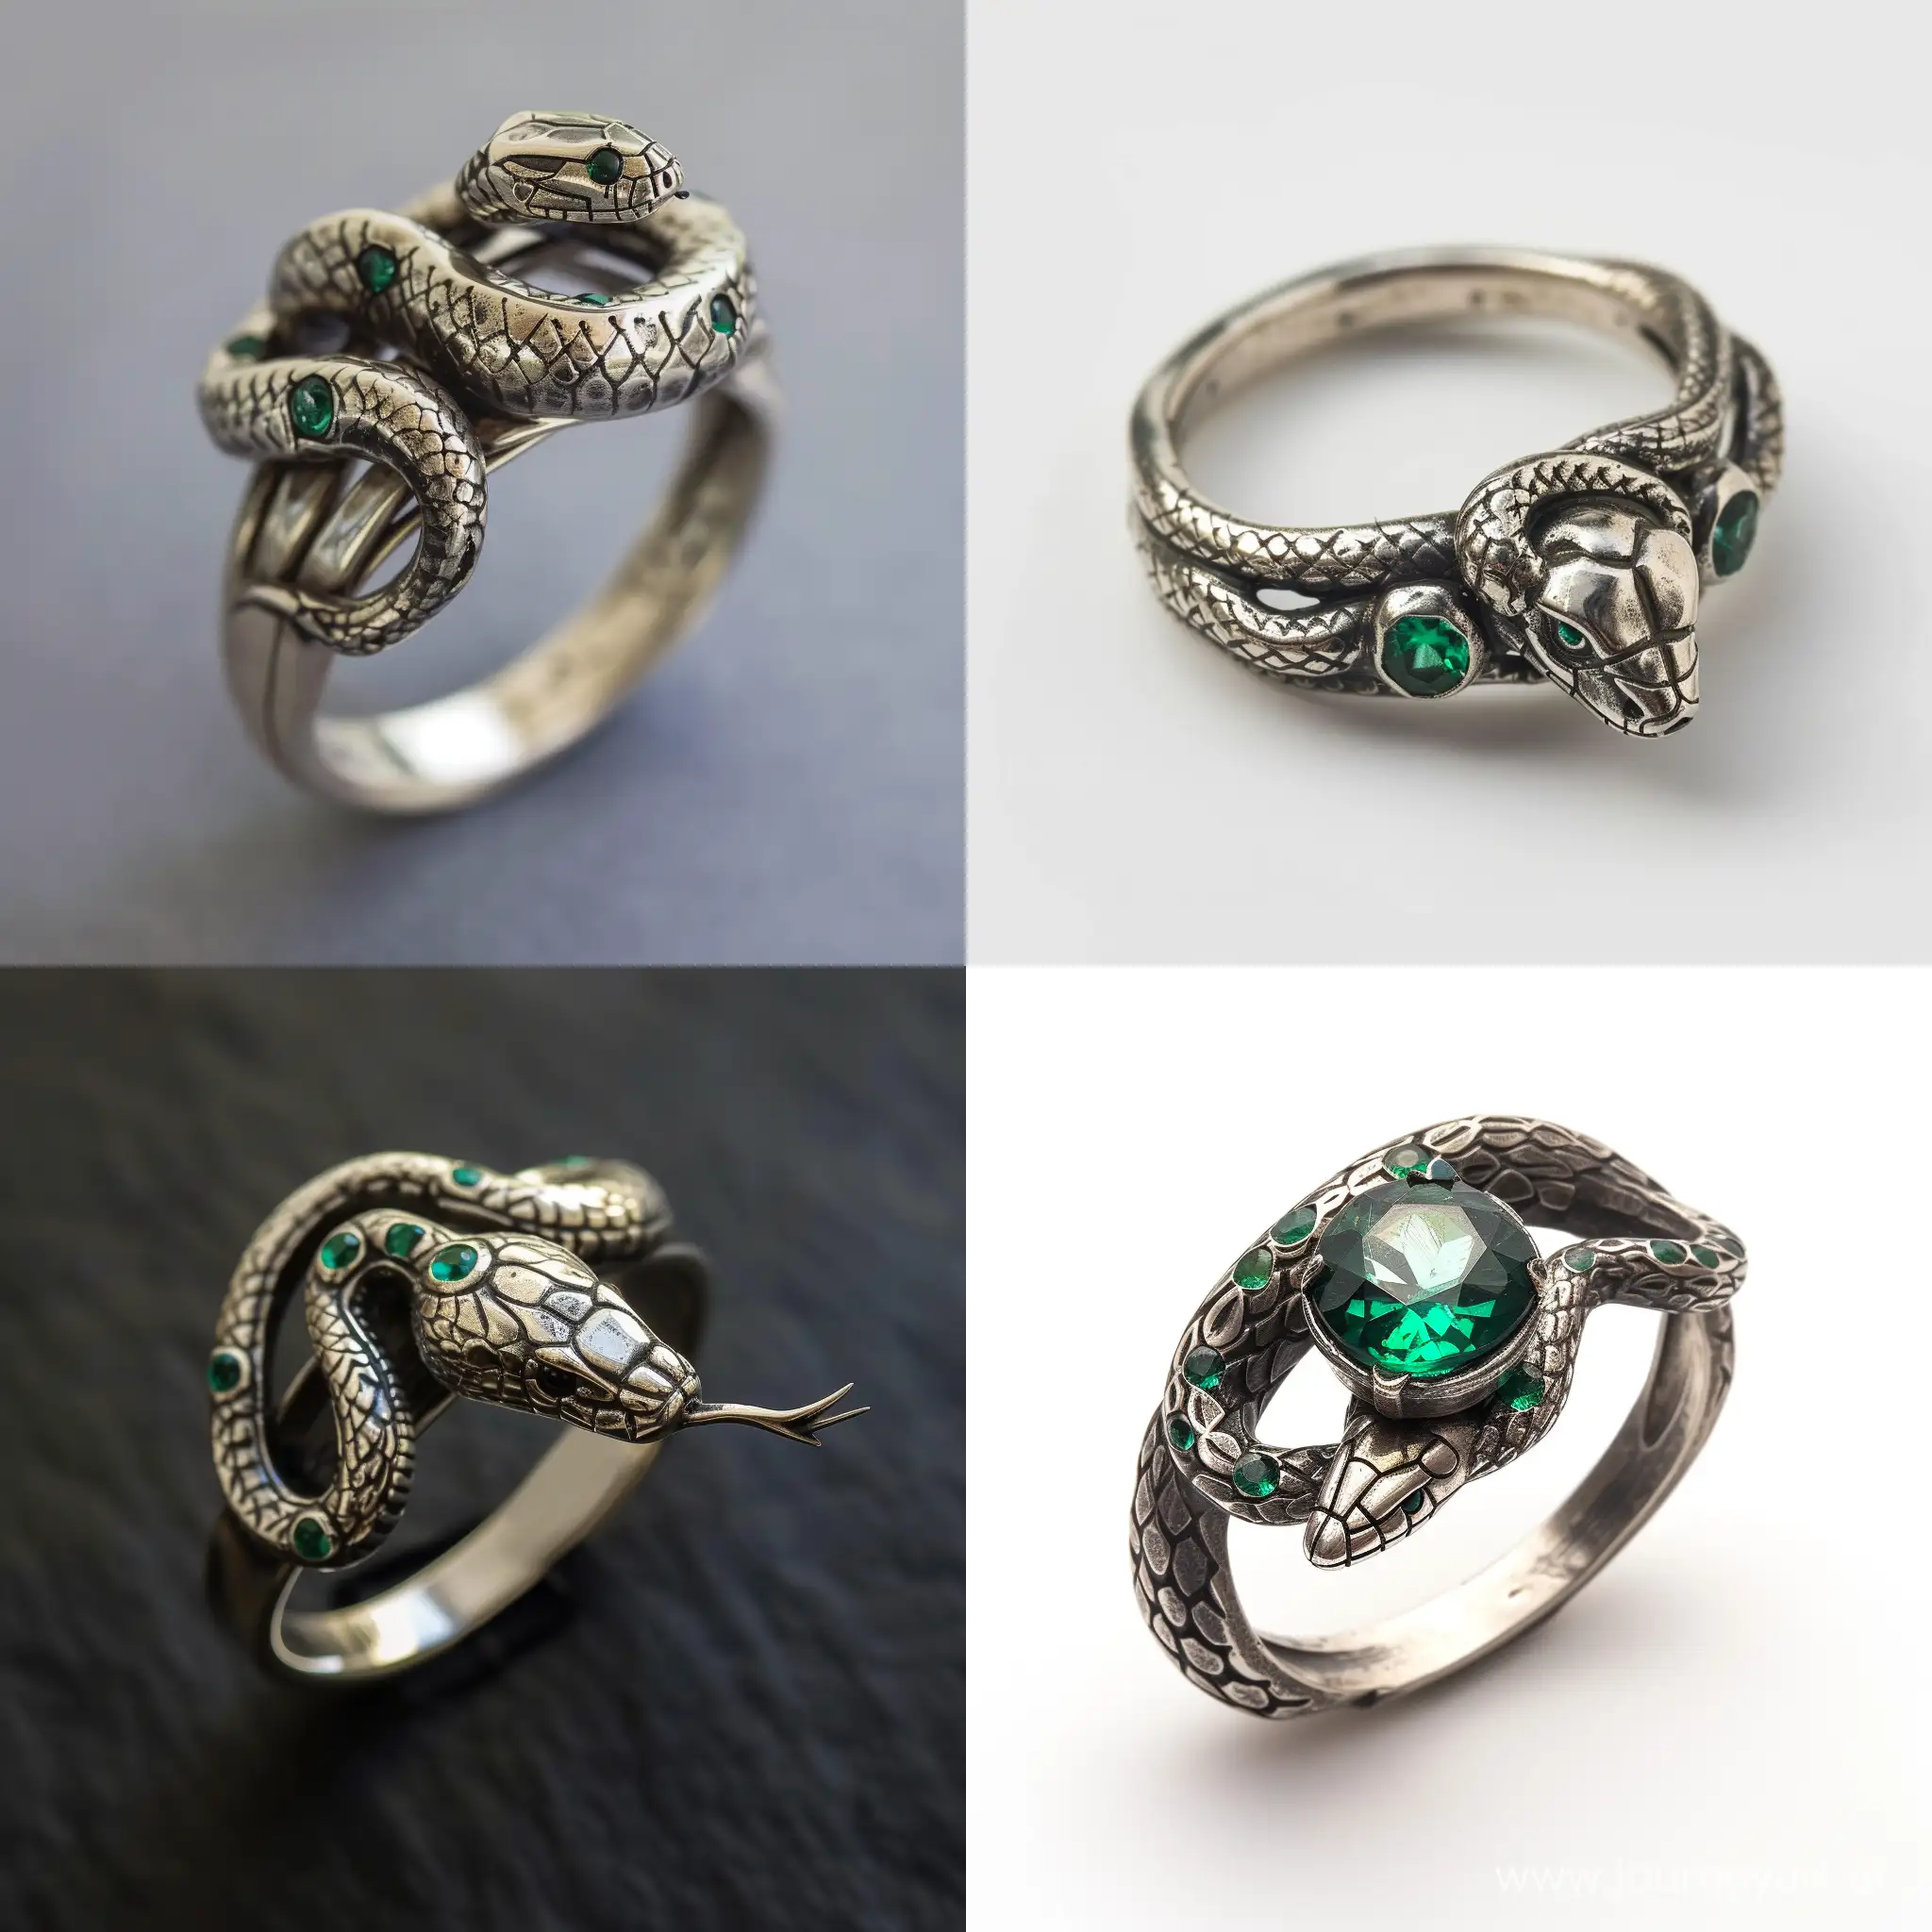 The ring that belonged to Lord Voldemort, silver, emeralds, snake, realistic